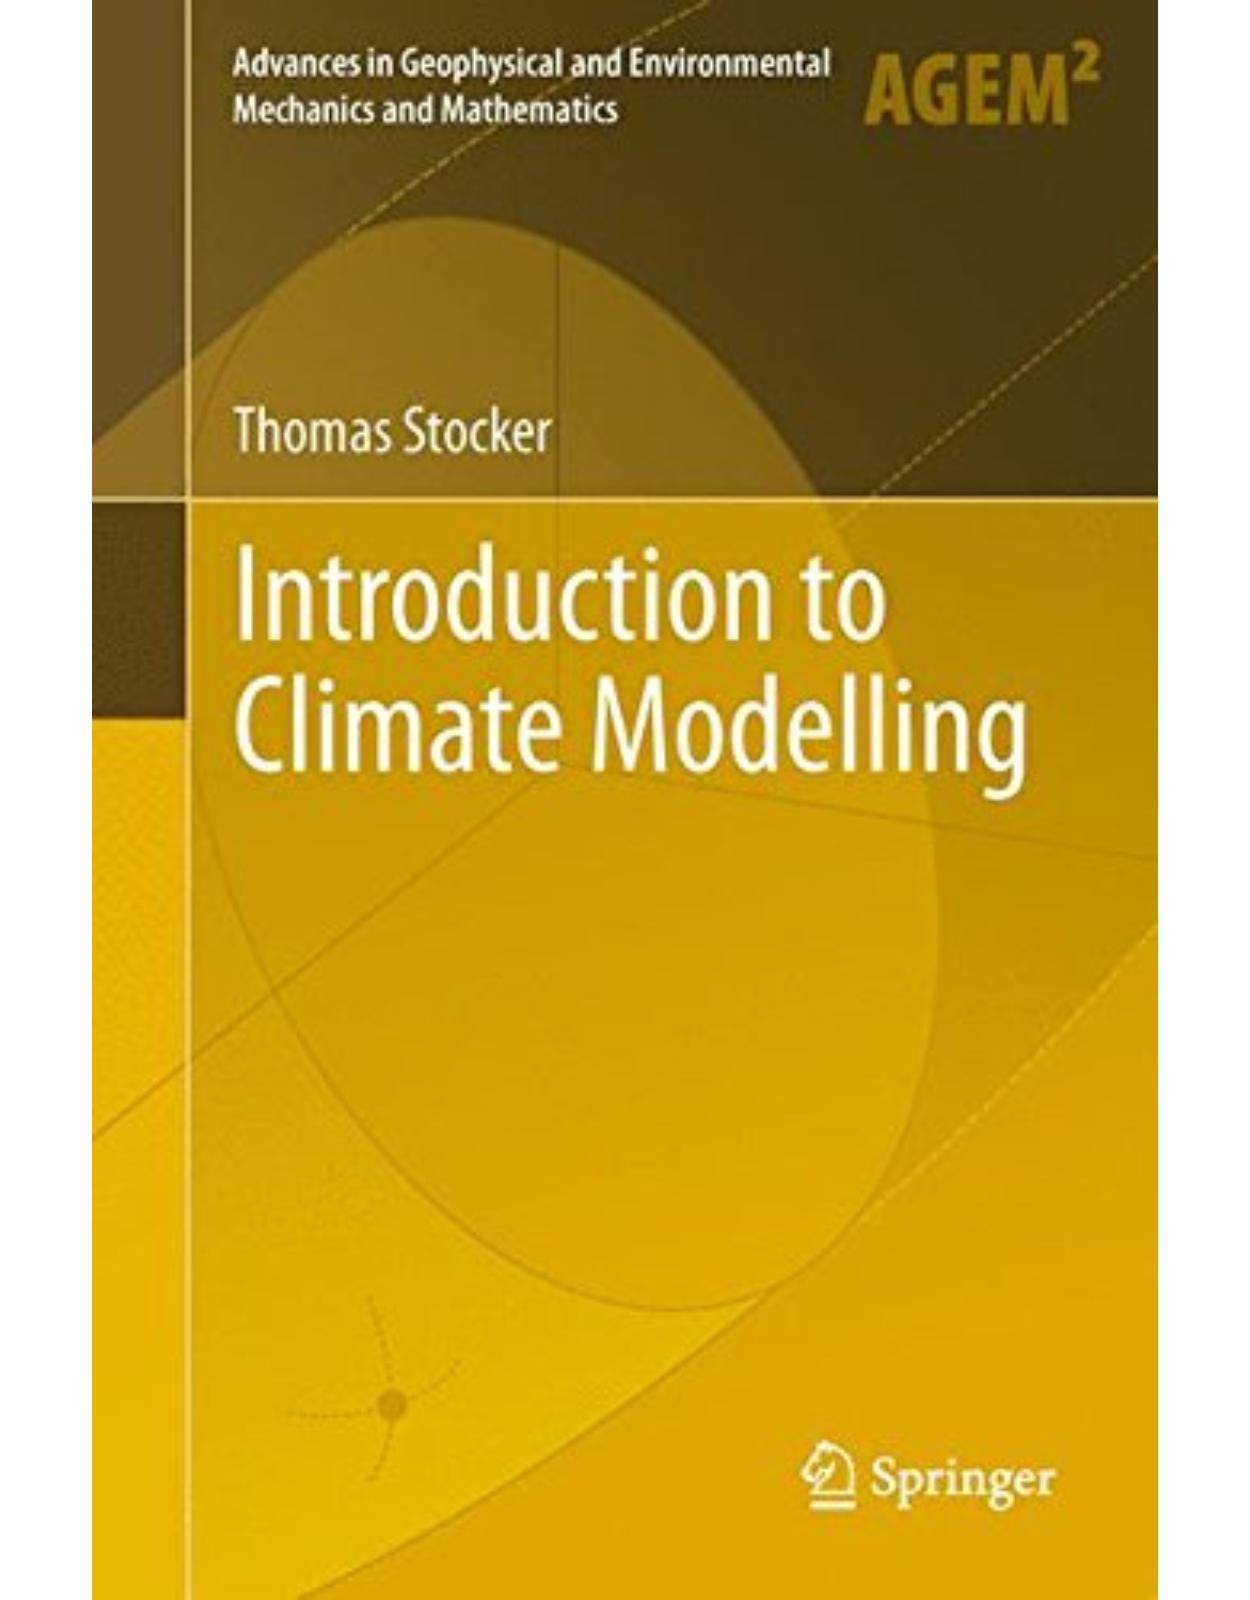 Introduction to Climate Modelling (Advances in Geophysical and Environmental Mechanics and Mathematics)